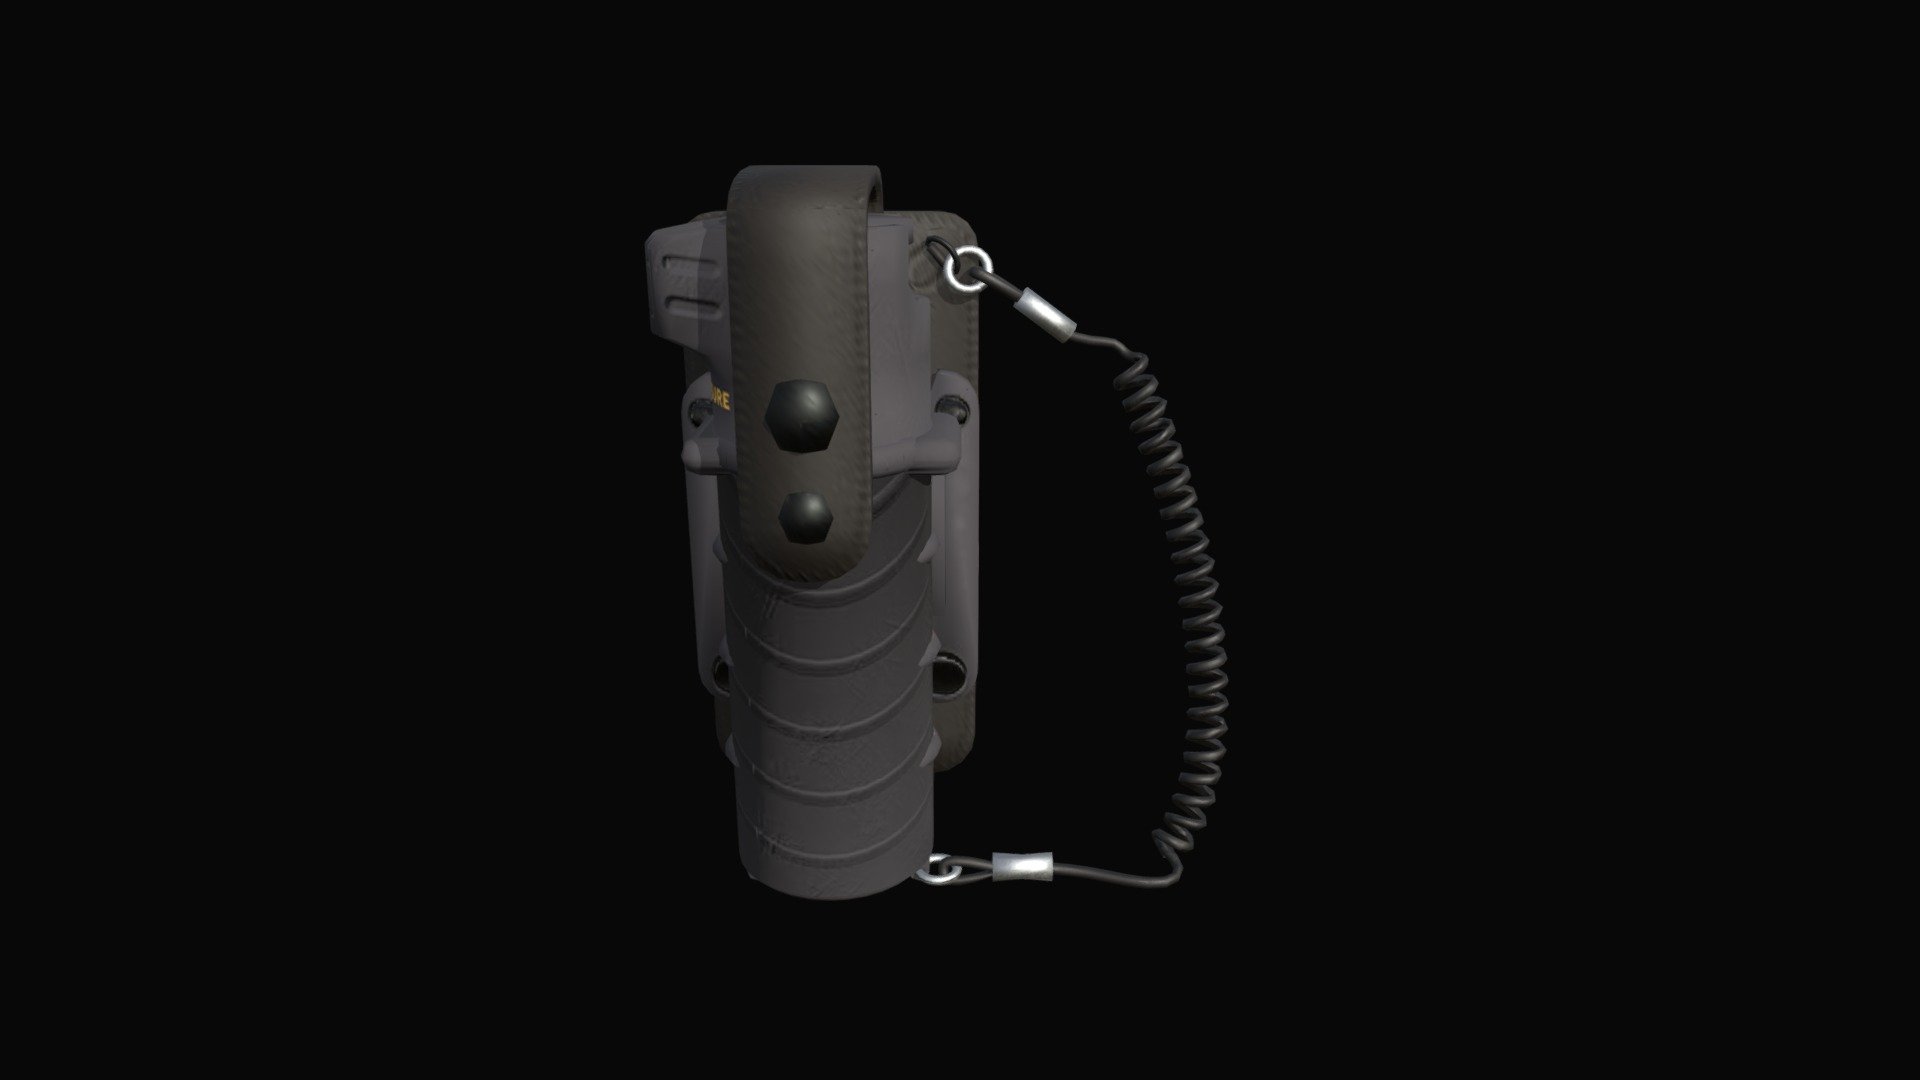 A quick pepper spray model with kinda shitty textures not the best but its free so idk u can maybe use it for smth enjoy salamaleikujm

aaaa - Pepper Spray - Download Free 3D model by Jens Doe (@jens143123) 3d model